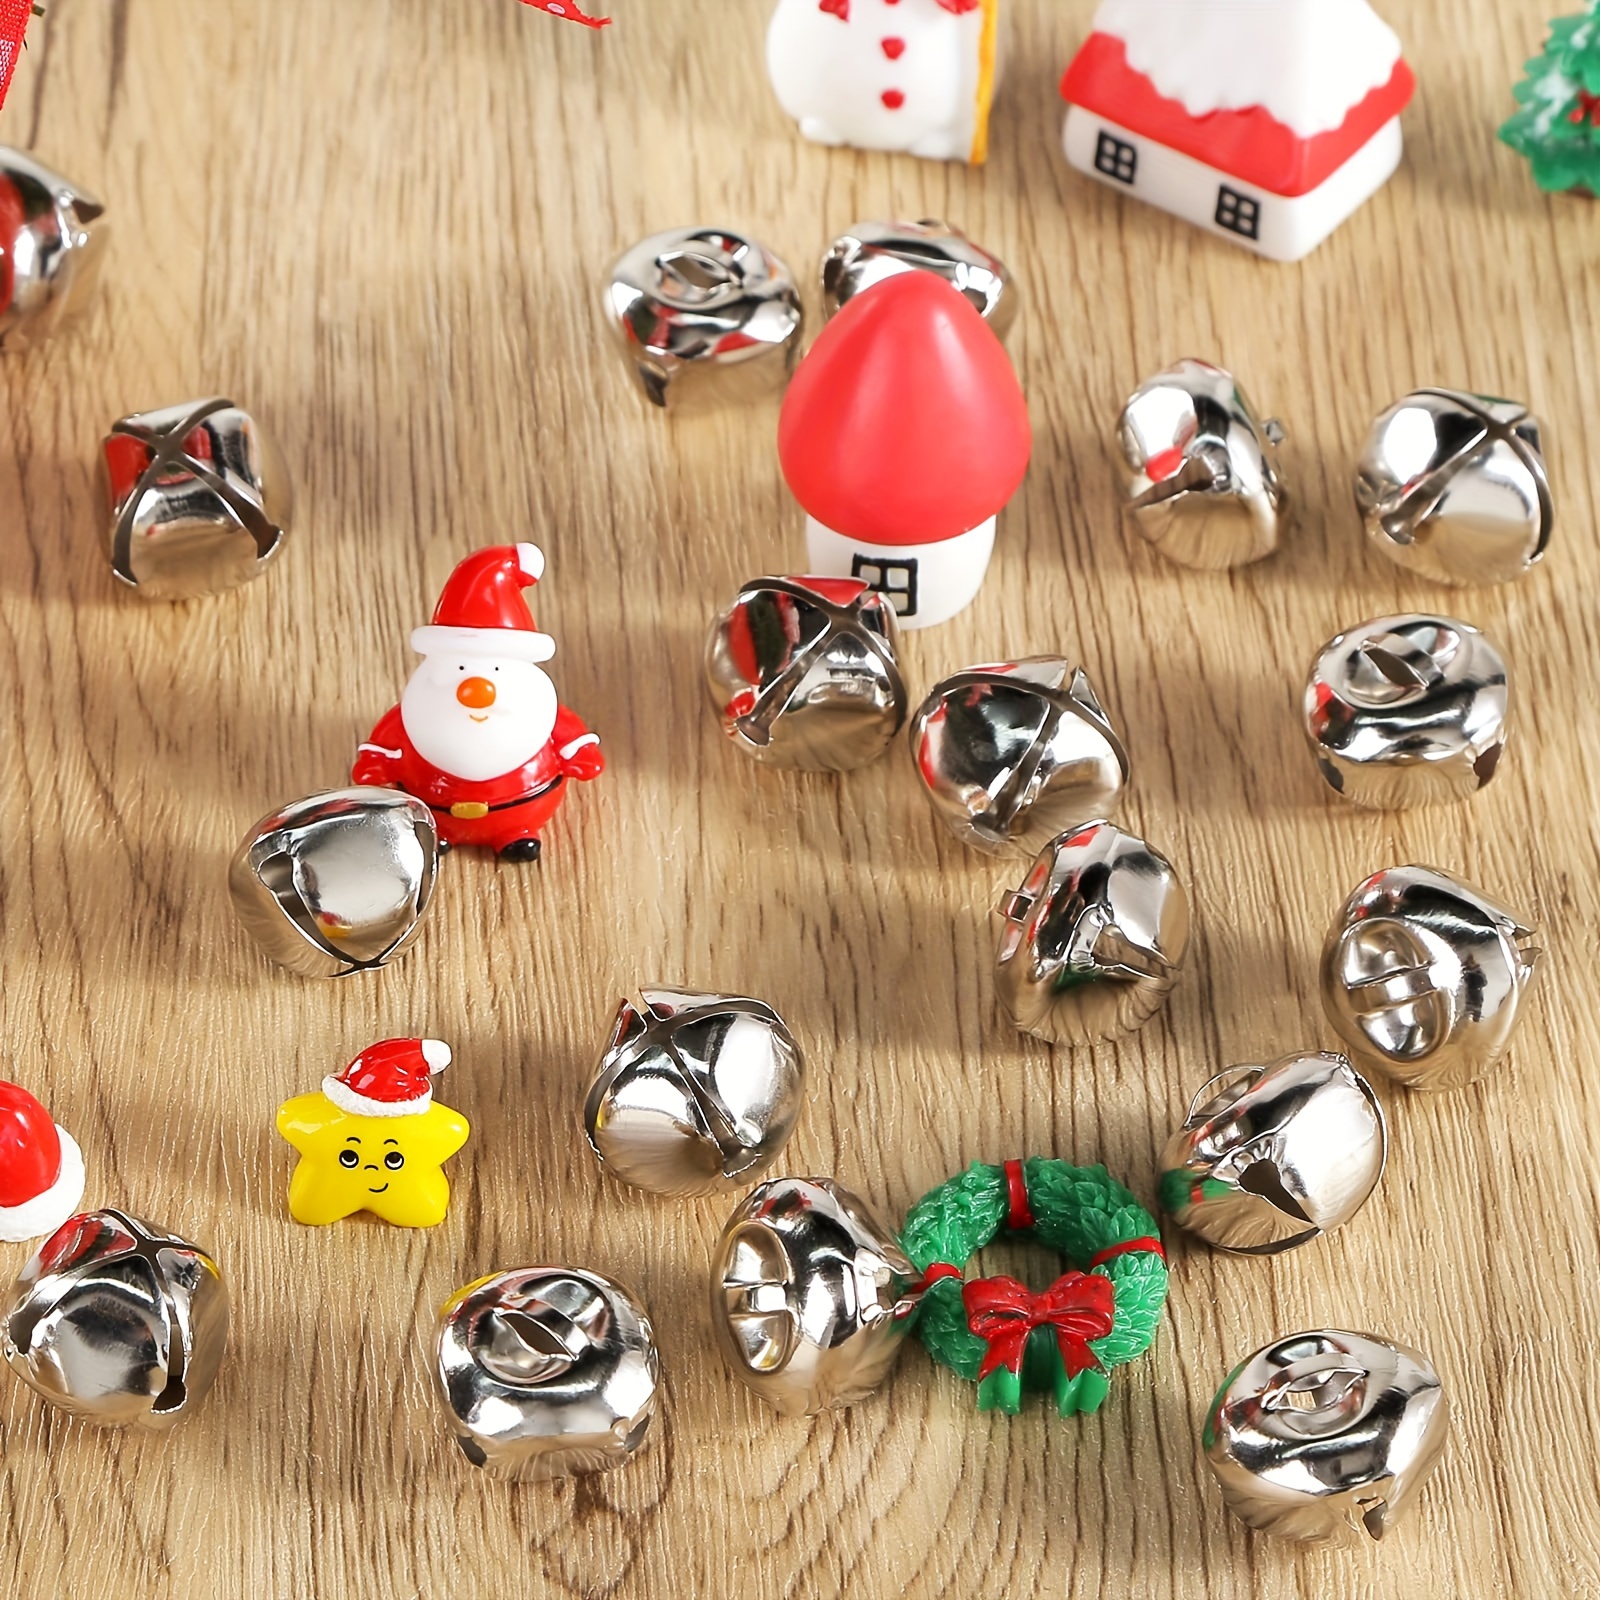 200pcs Jingle Bells for Crafts, 0.4/0.5/0.6 Inch Small Colorful Craft Bells  in 4 Colors Christmas Jingle Bells for Tree Home Christmas Holiday